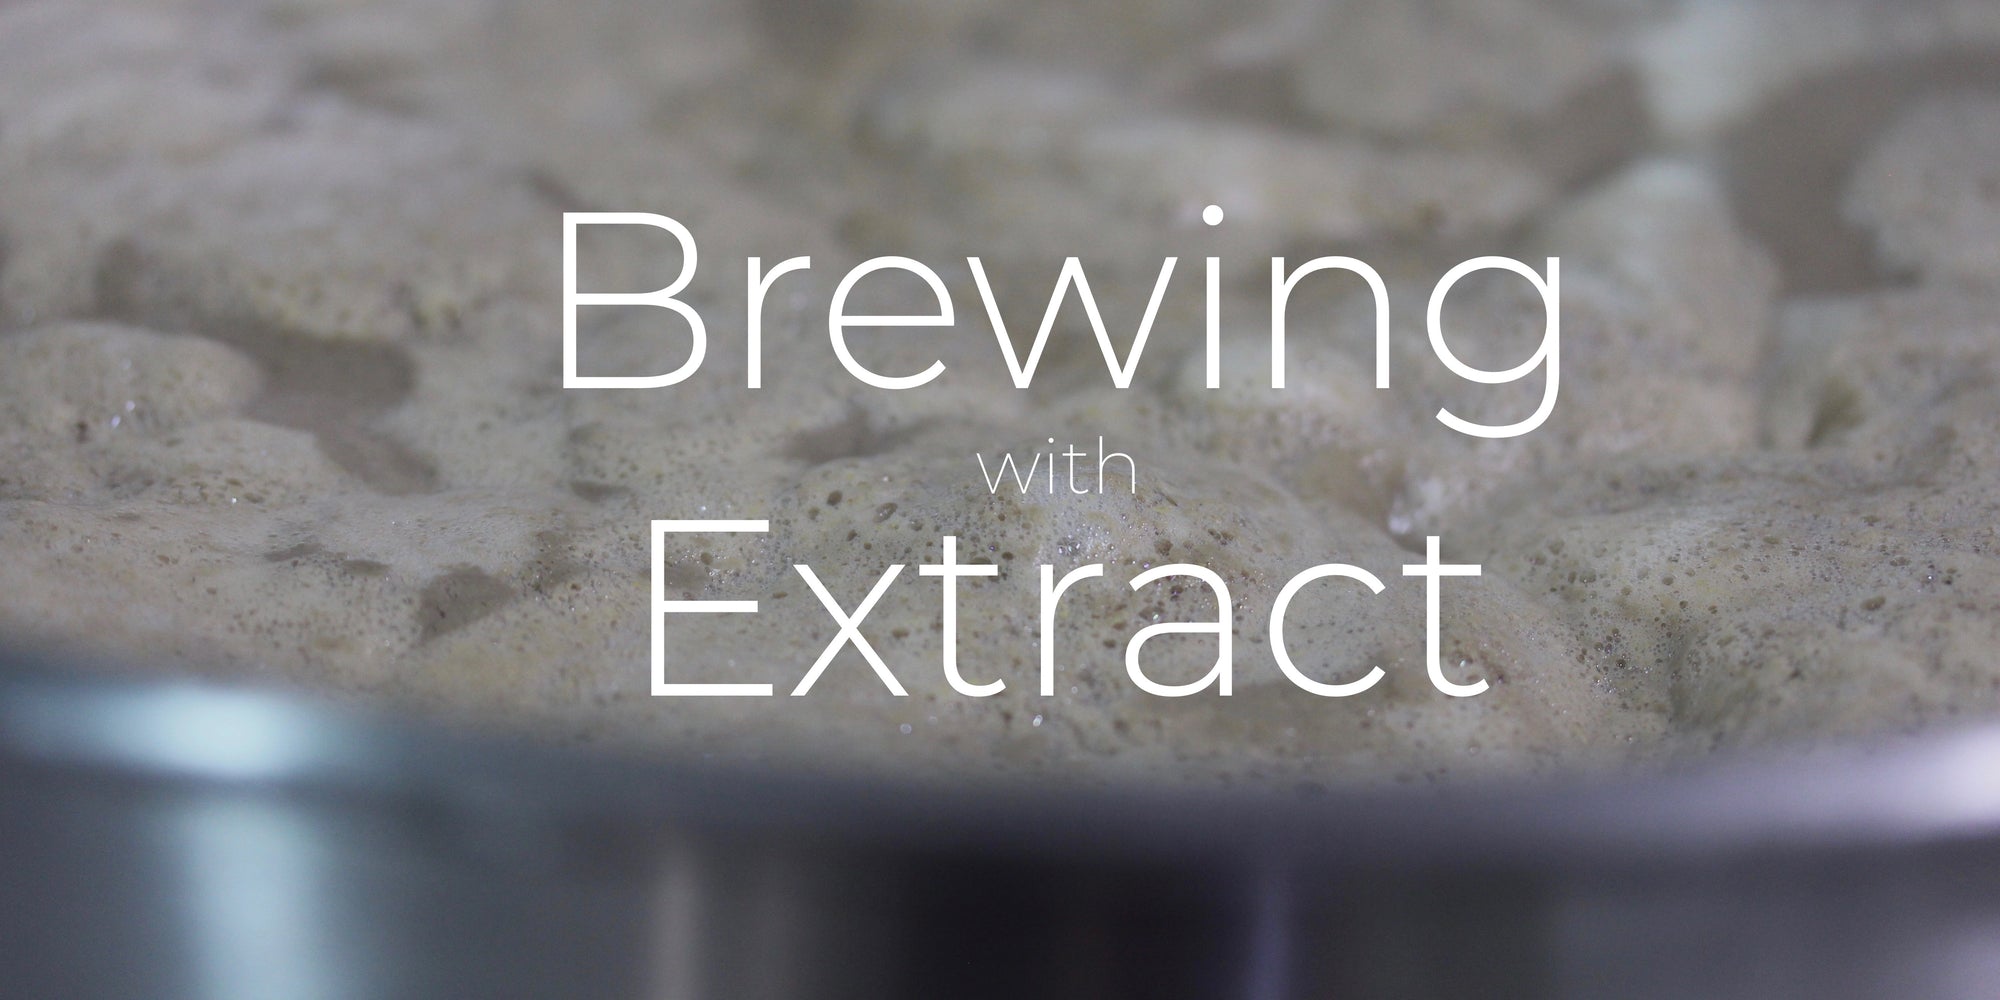 Brewing with Extract